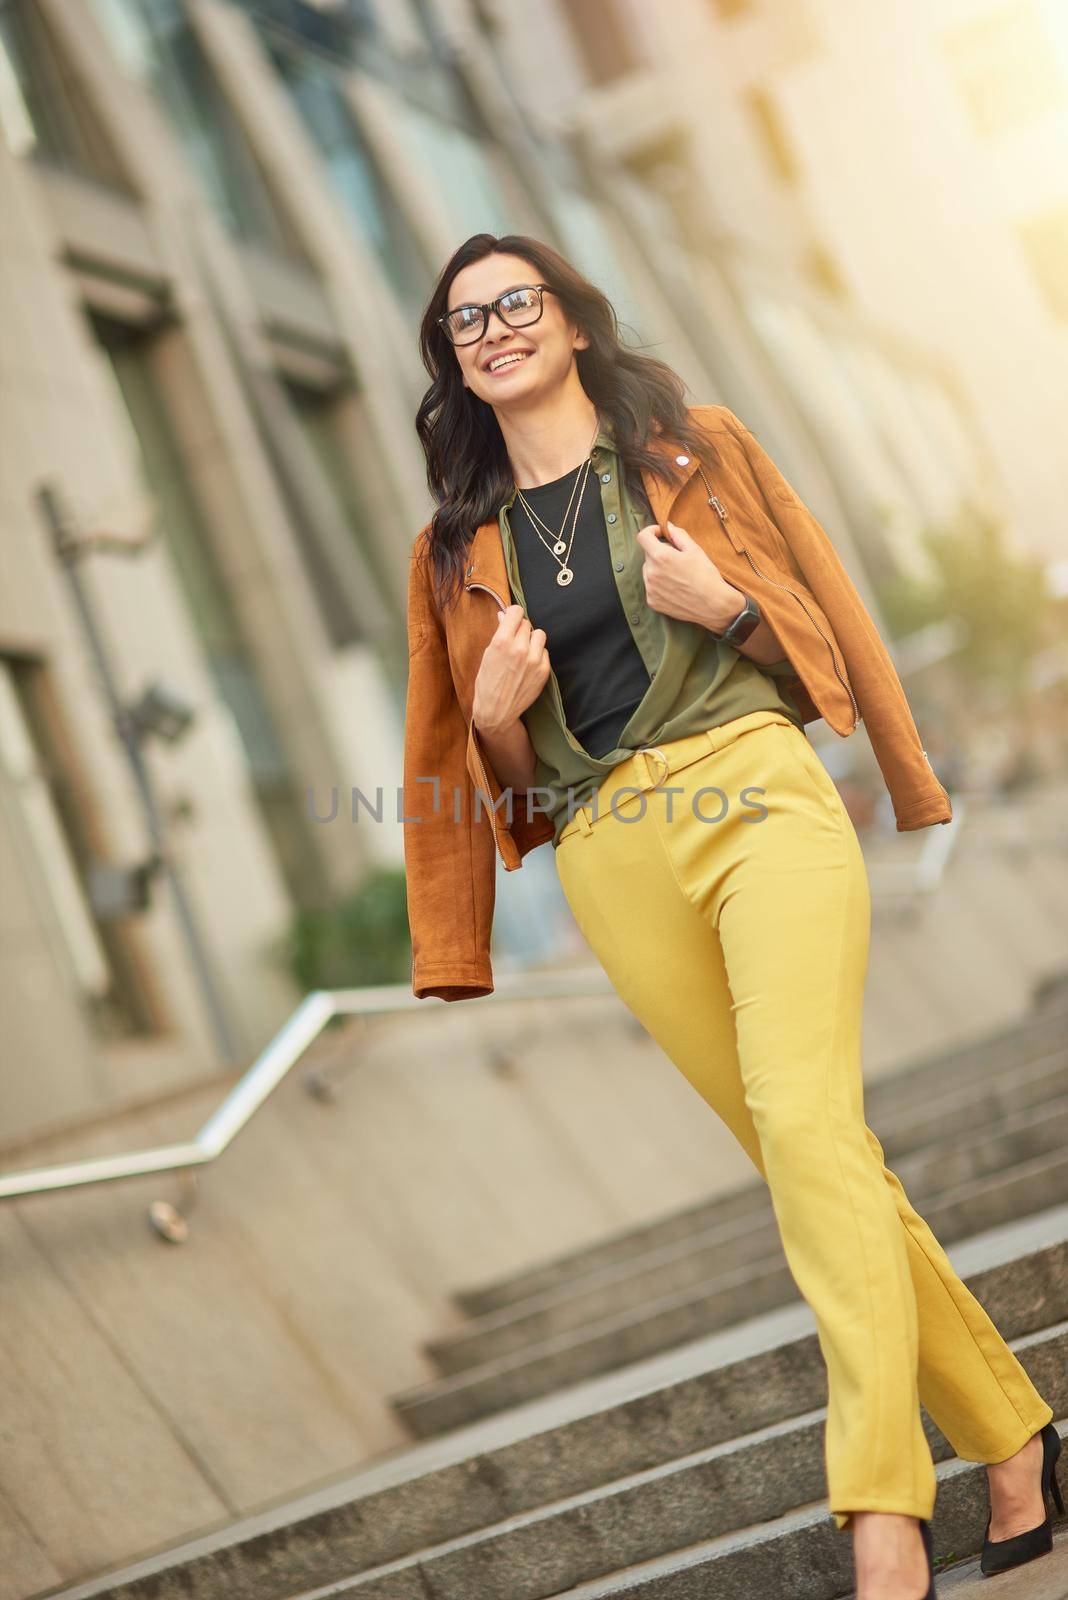 Enjoying nice day outdoors. Full length of a young beautiful and stylish caucasian woman or business lady walking city streets and smiling by friendsstock